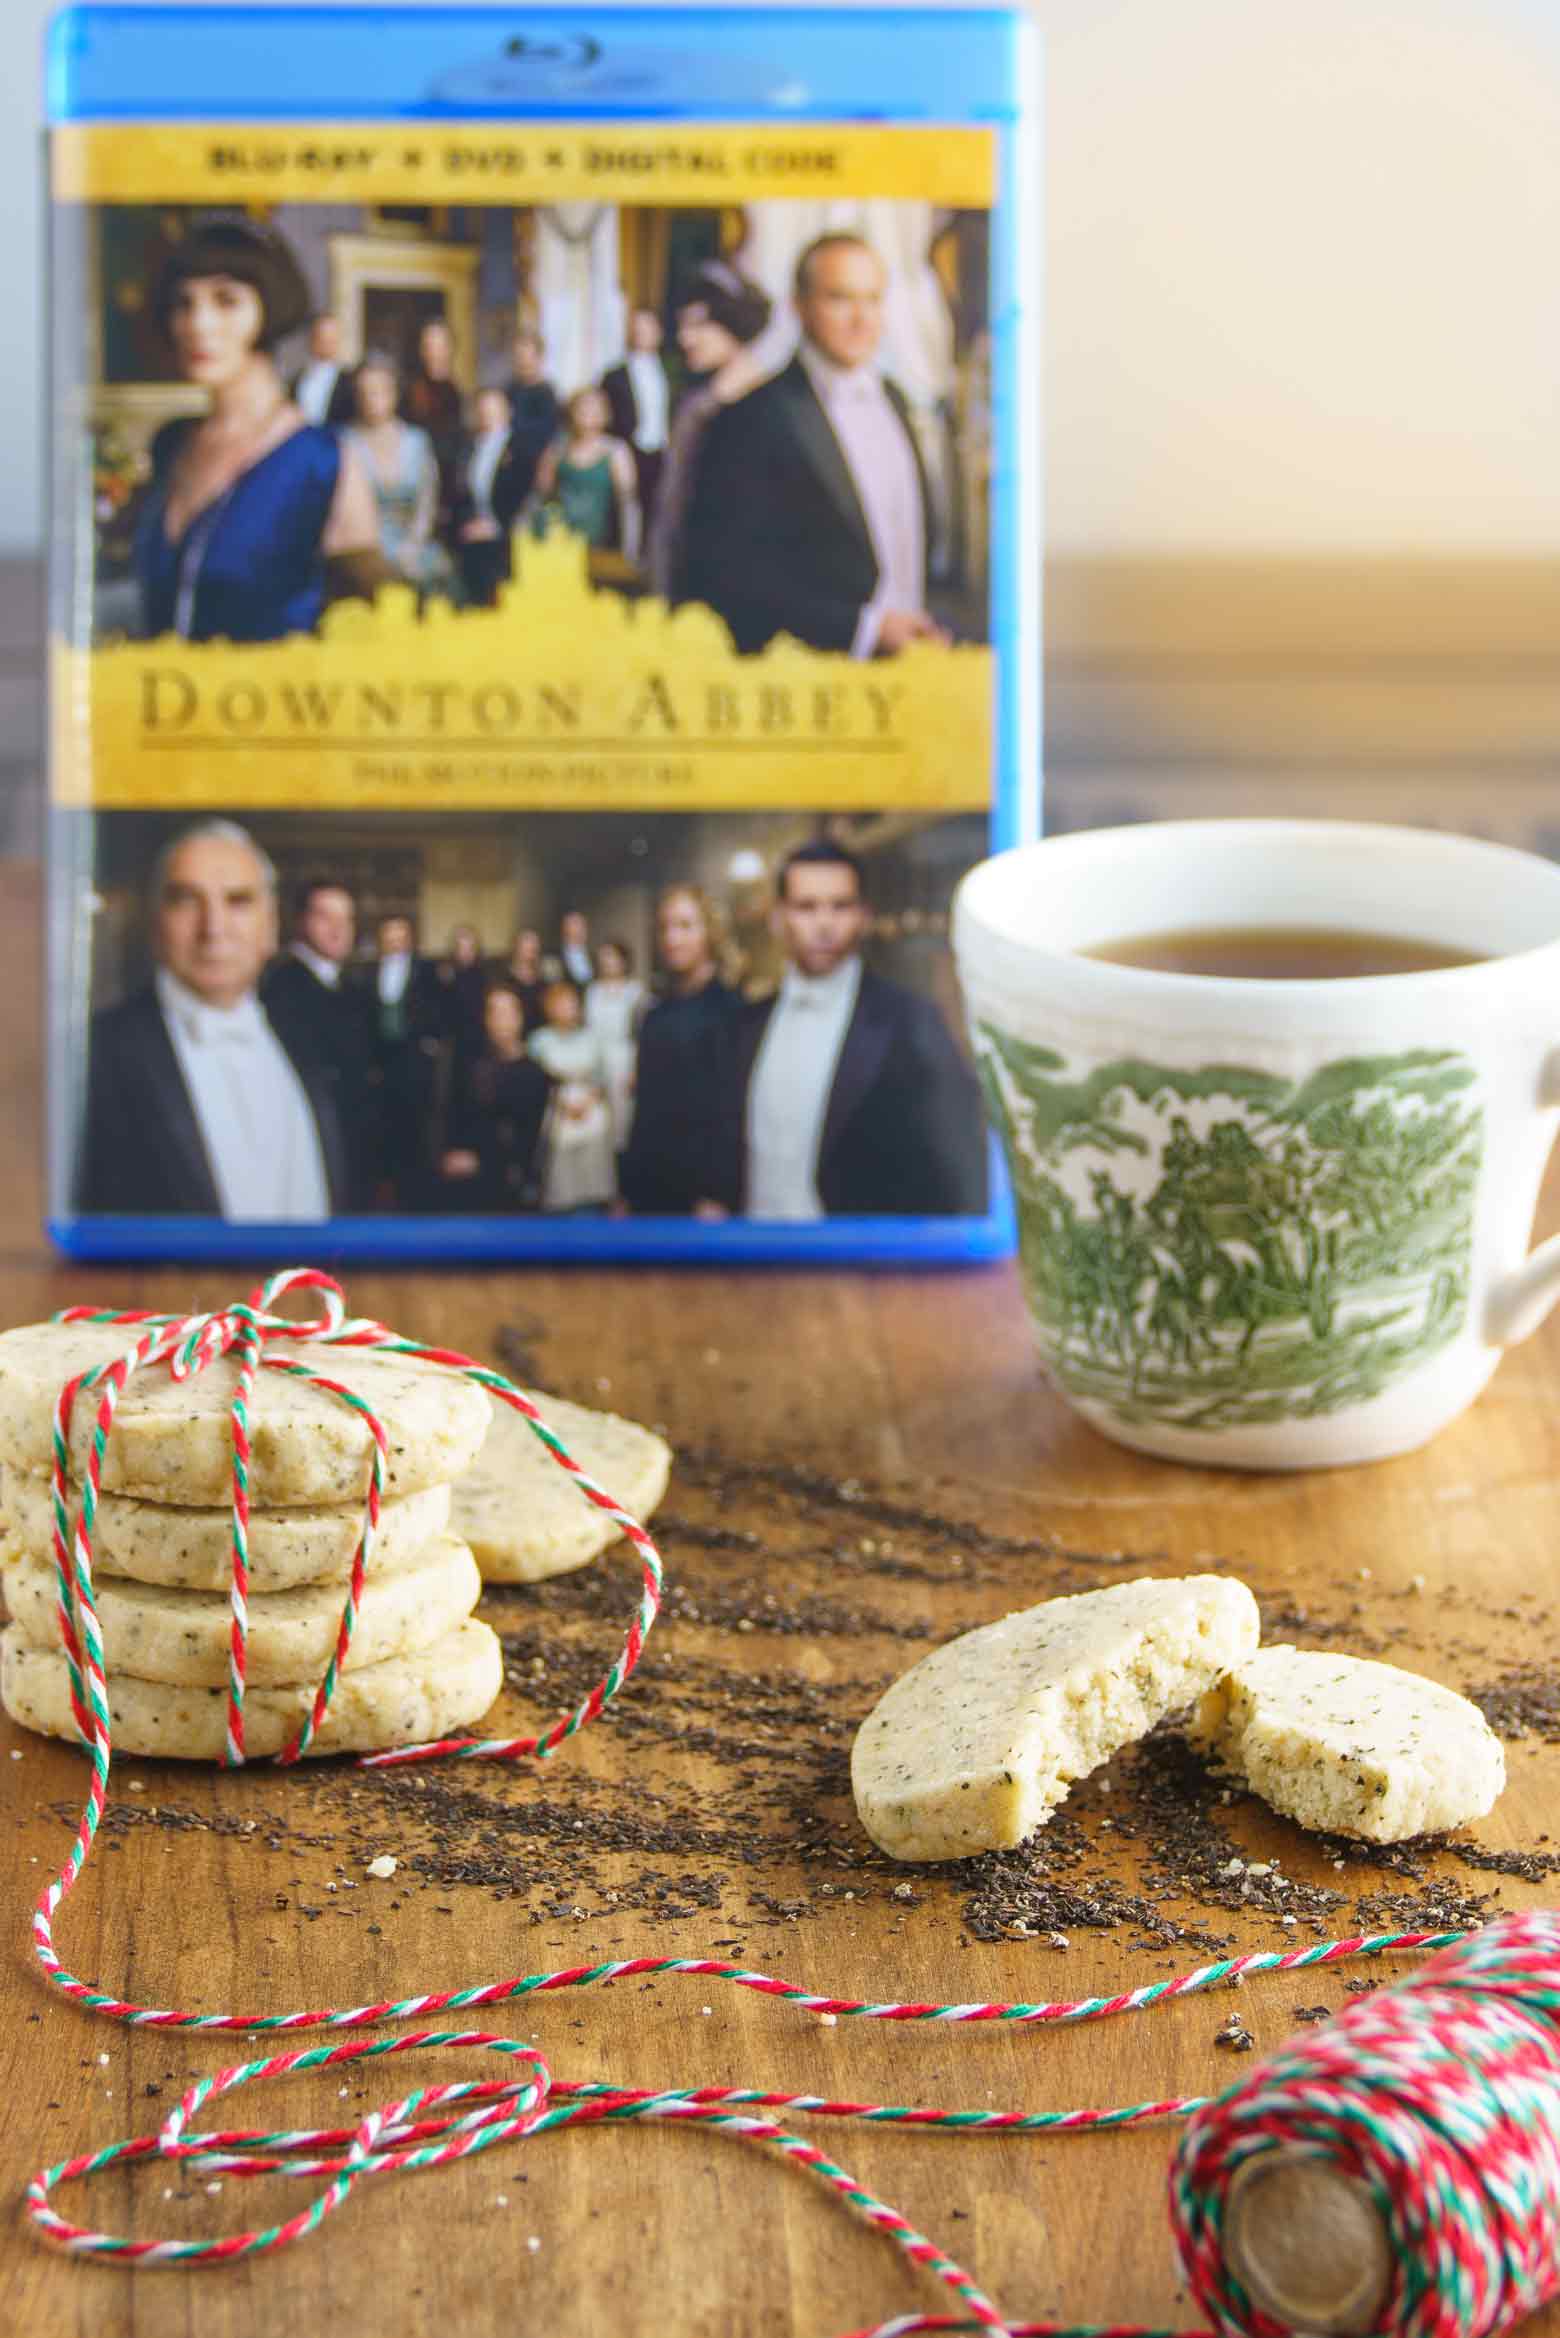 Downton Abbey DVD with tea and Cookies